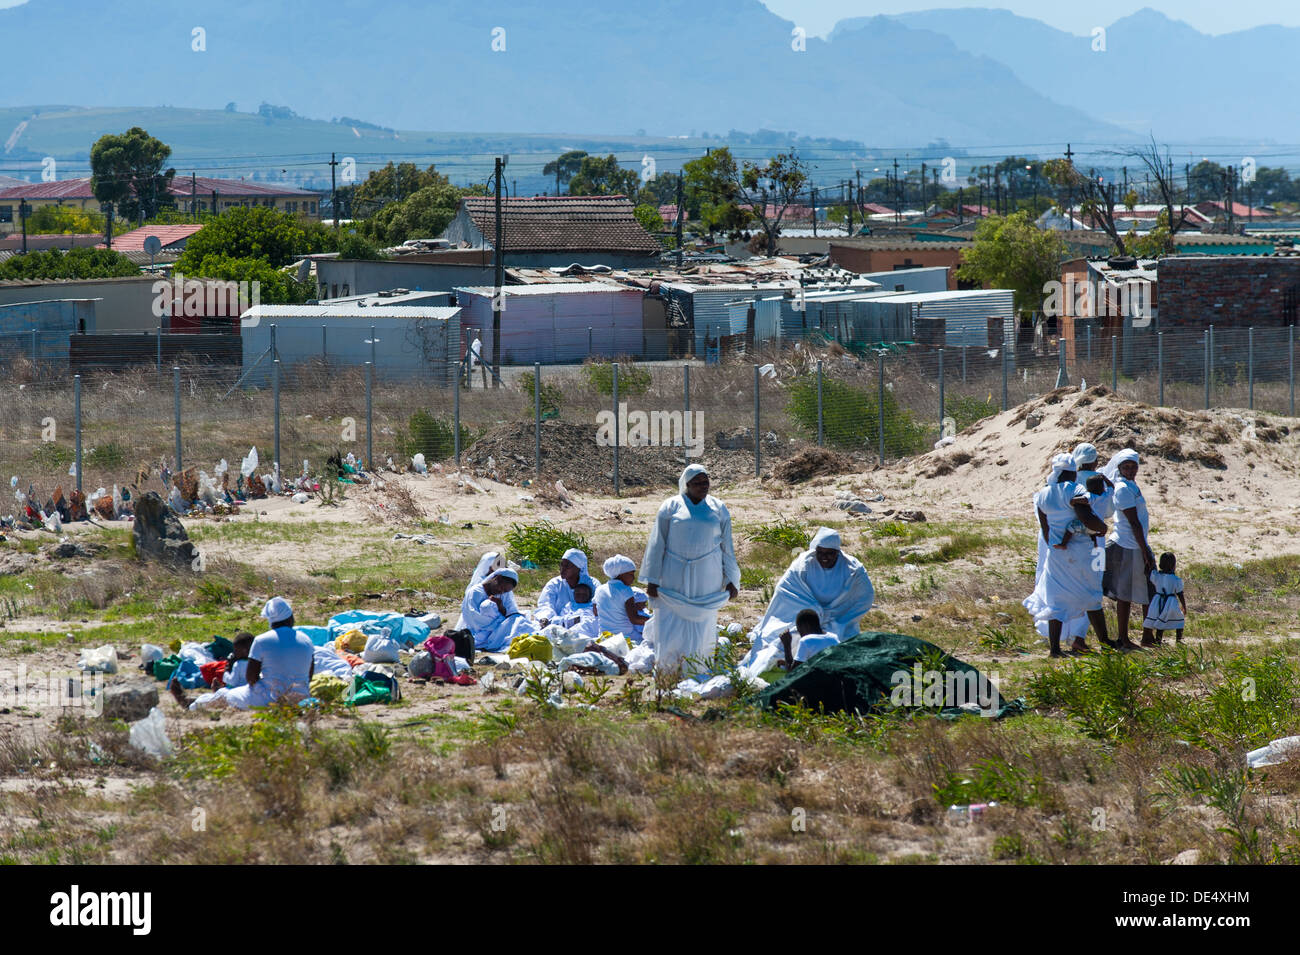 Religious group gathers for payers in Khayelitsha, a partially informal township in Cape Town, Western Cape, South Africa Stock Photo